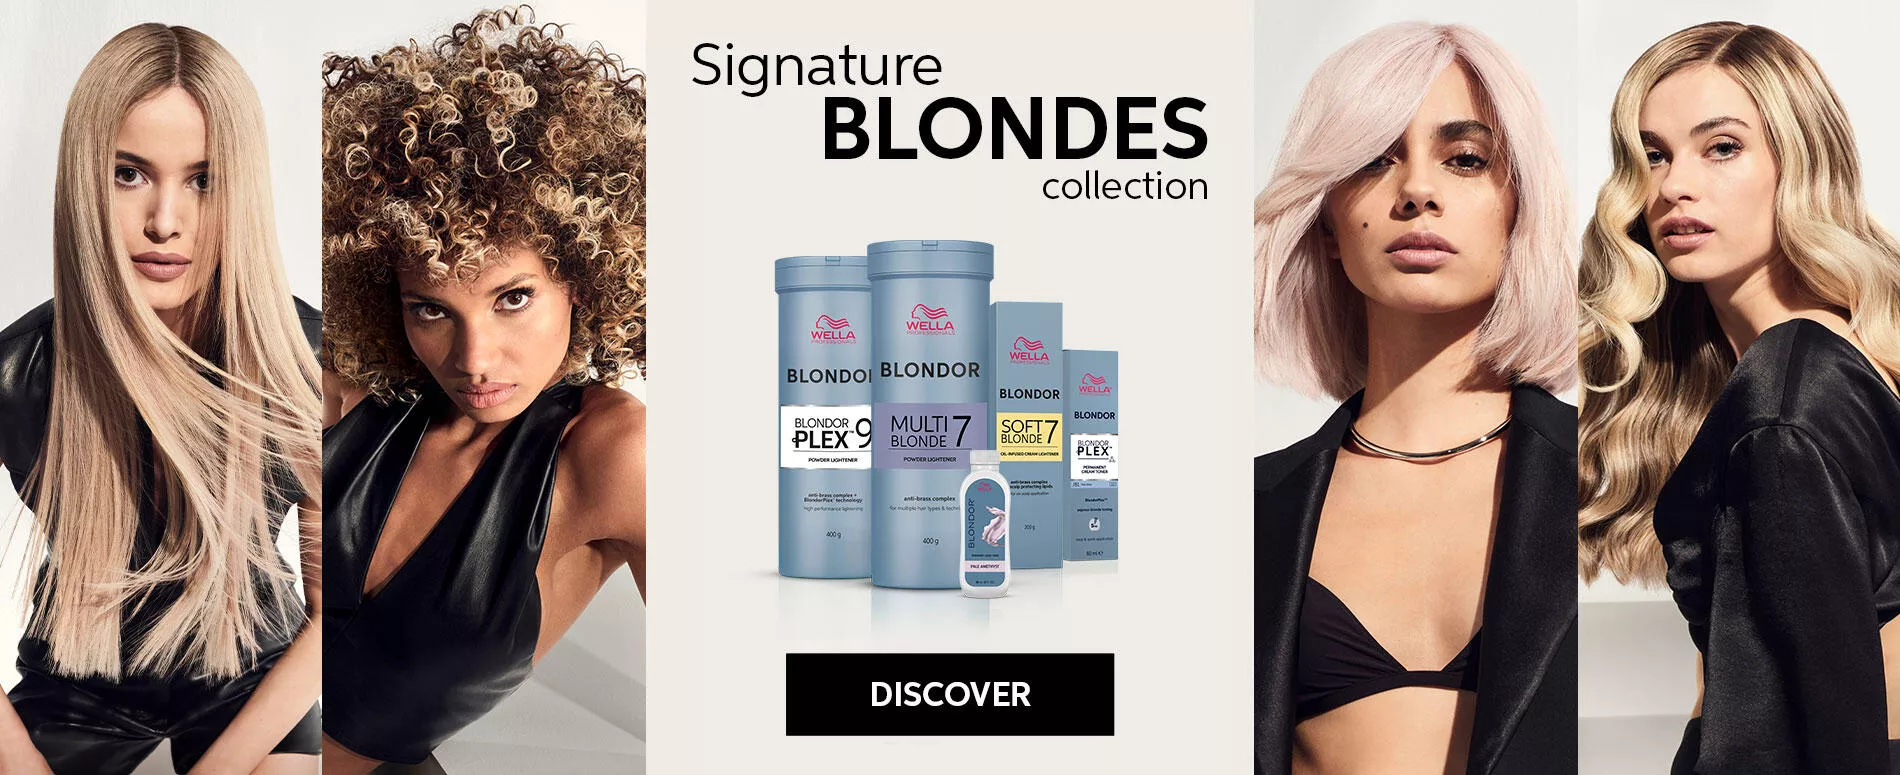 Four models in individual images with the Wella Professionals Signature Blondes Blondor range in the middle. One model with long, straight blonde hair. One model with afro  curly blonde hair, one model with pink-blonde, short hair. One model with curled blonde hair.